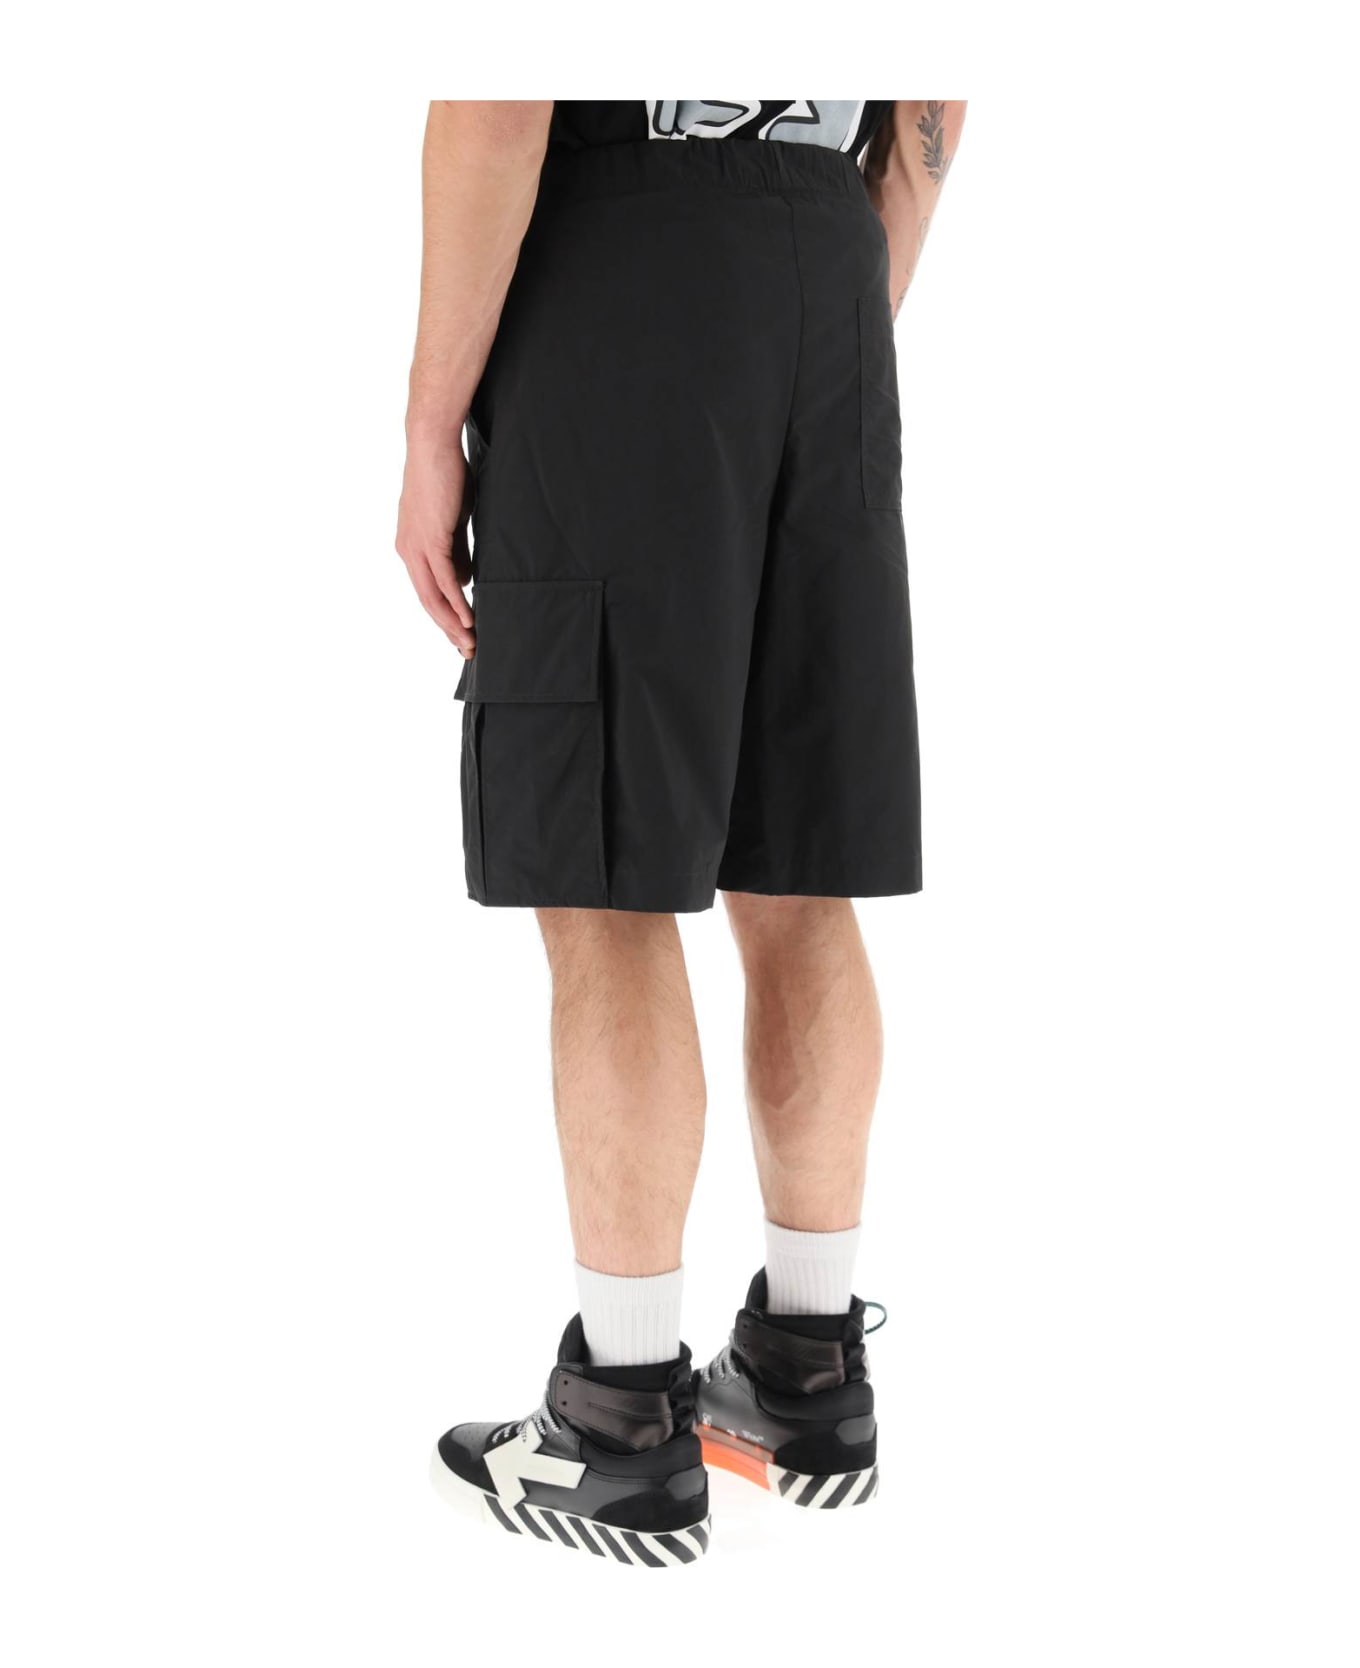 Off-White Industrial Cargo Shorts - Black